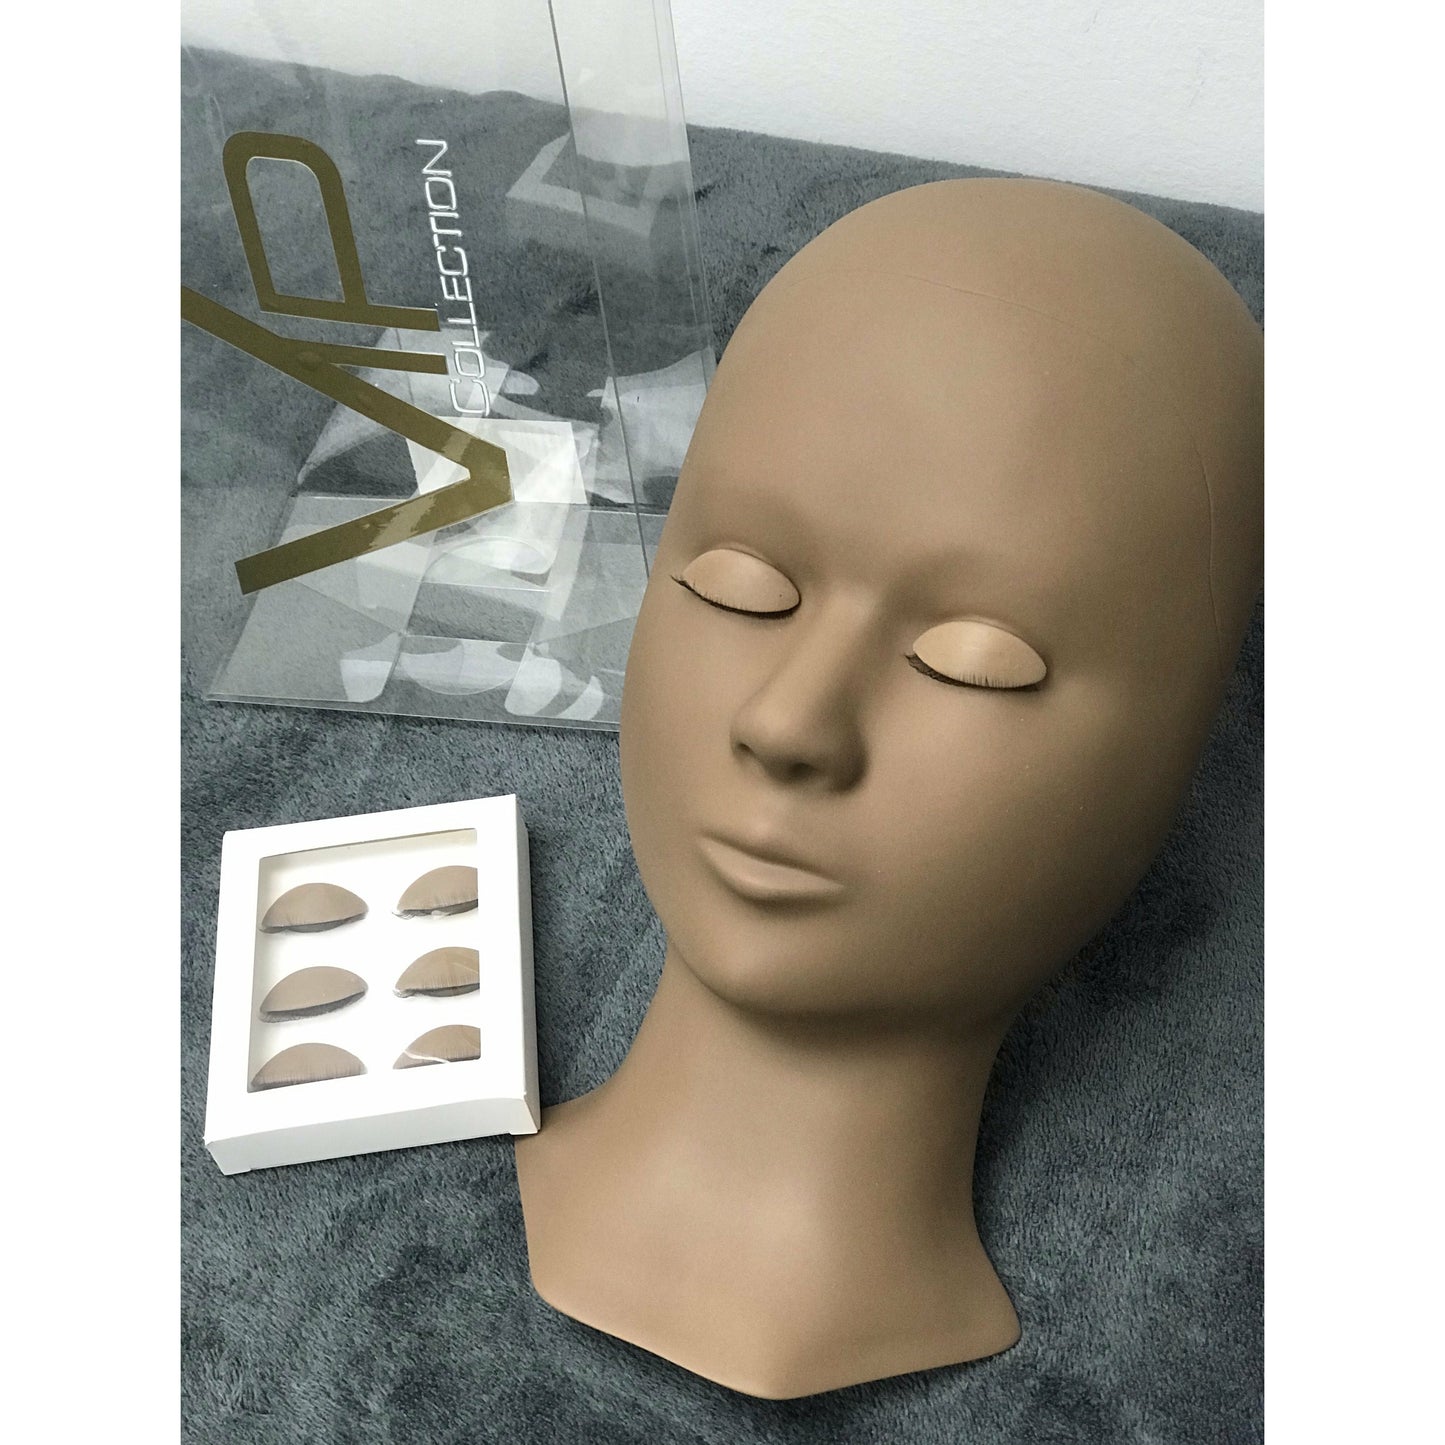 New Eyelash Practice Mannequin with 3 sets of removable eyes.